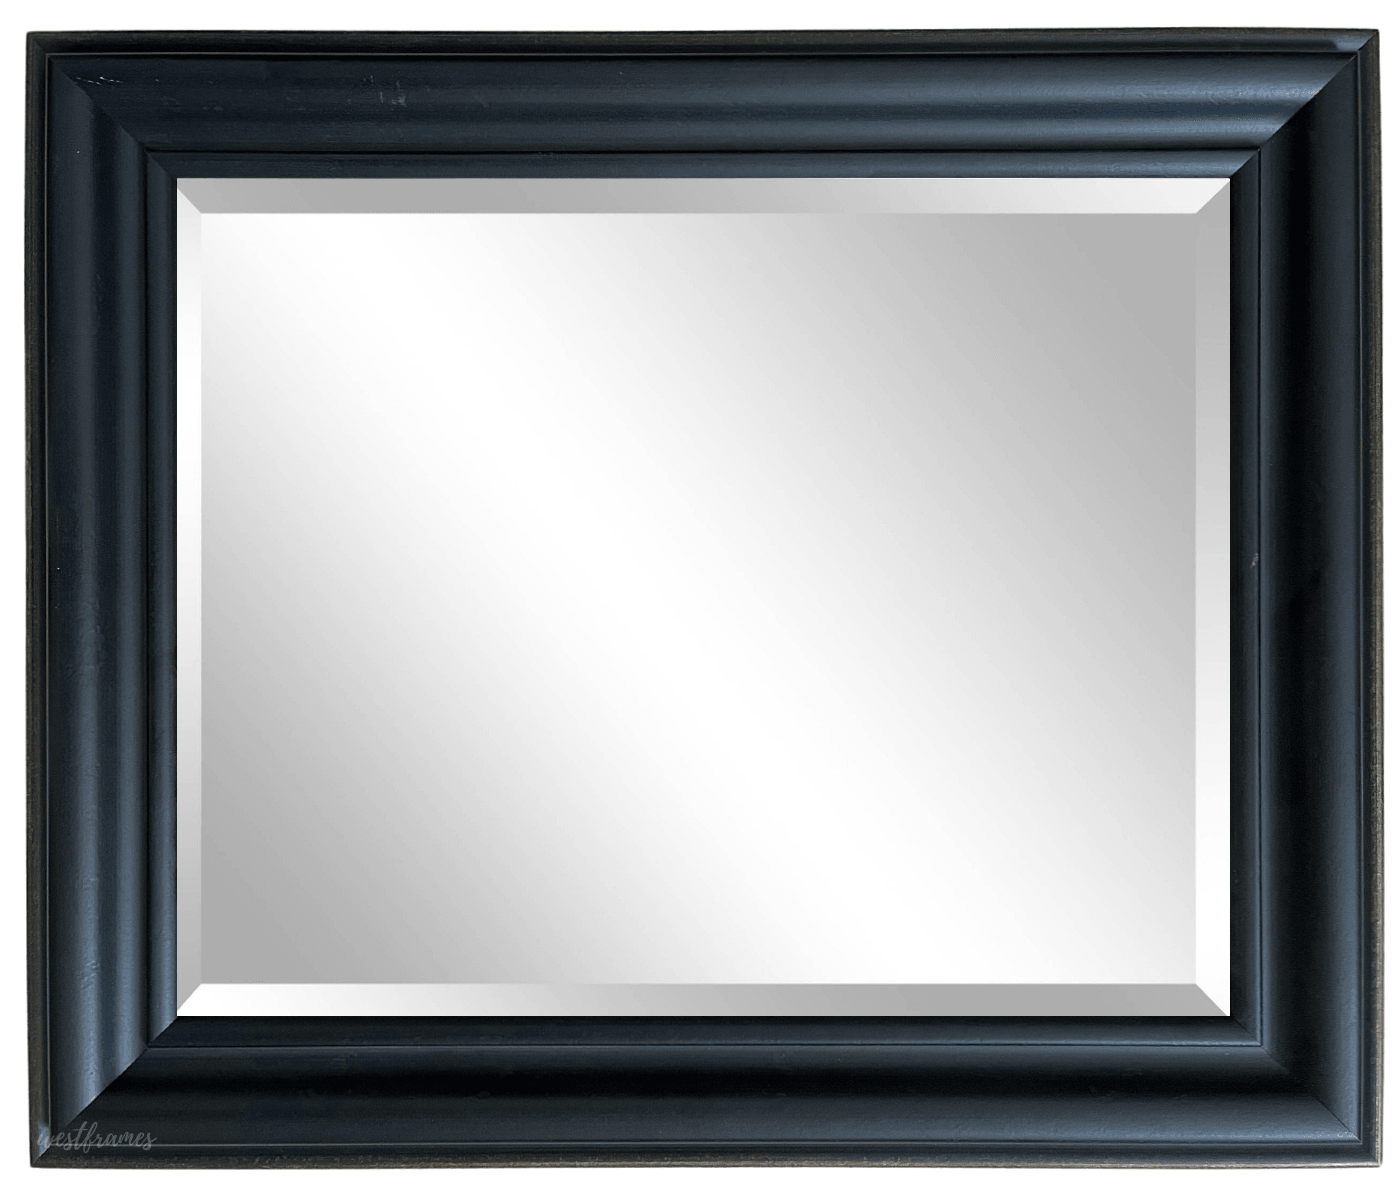 Vienna Rustic Vintage Black Gold Trim Finish Traditional Style Wood Framed Wall Mirror 3" - West Frames